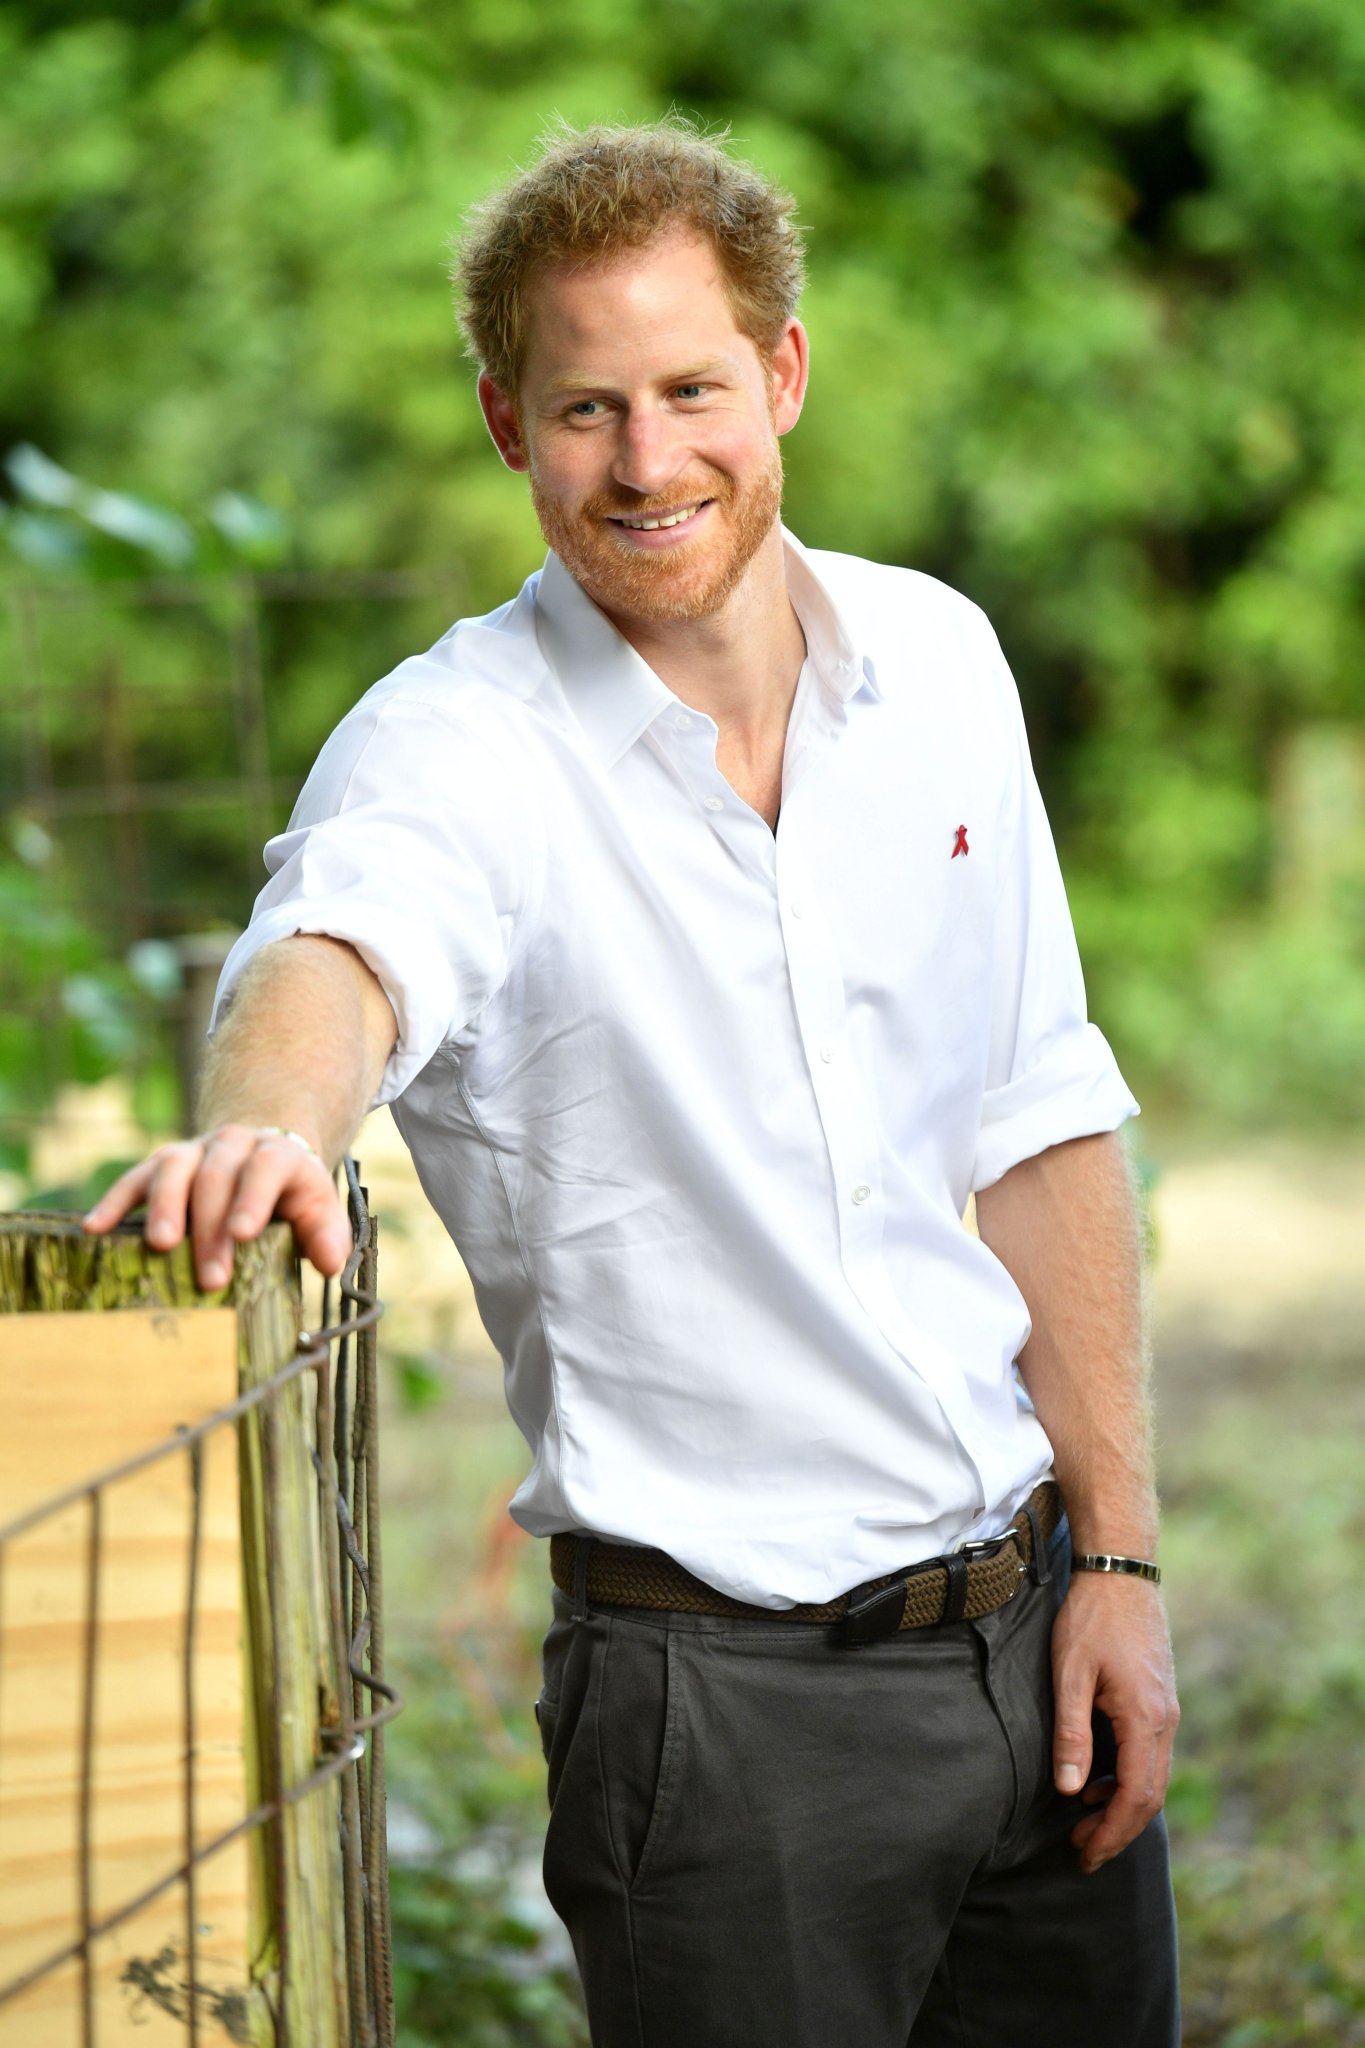 Things You Didn’t Know About Prince Harry